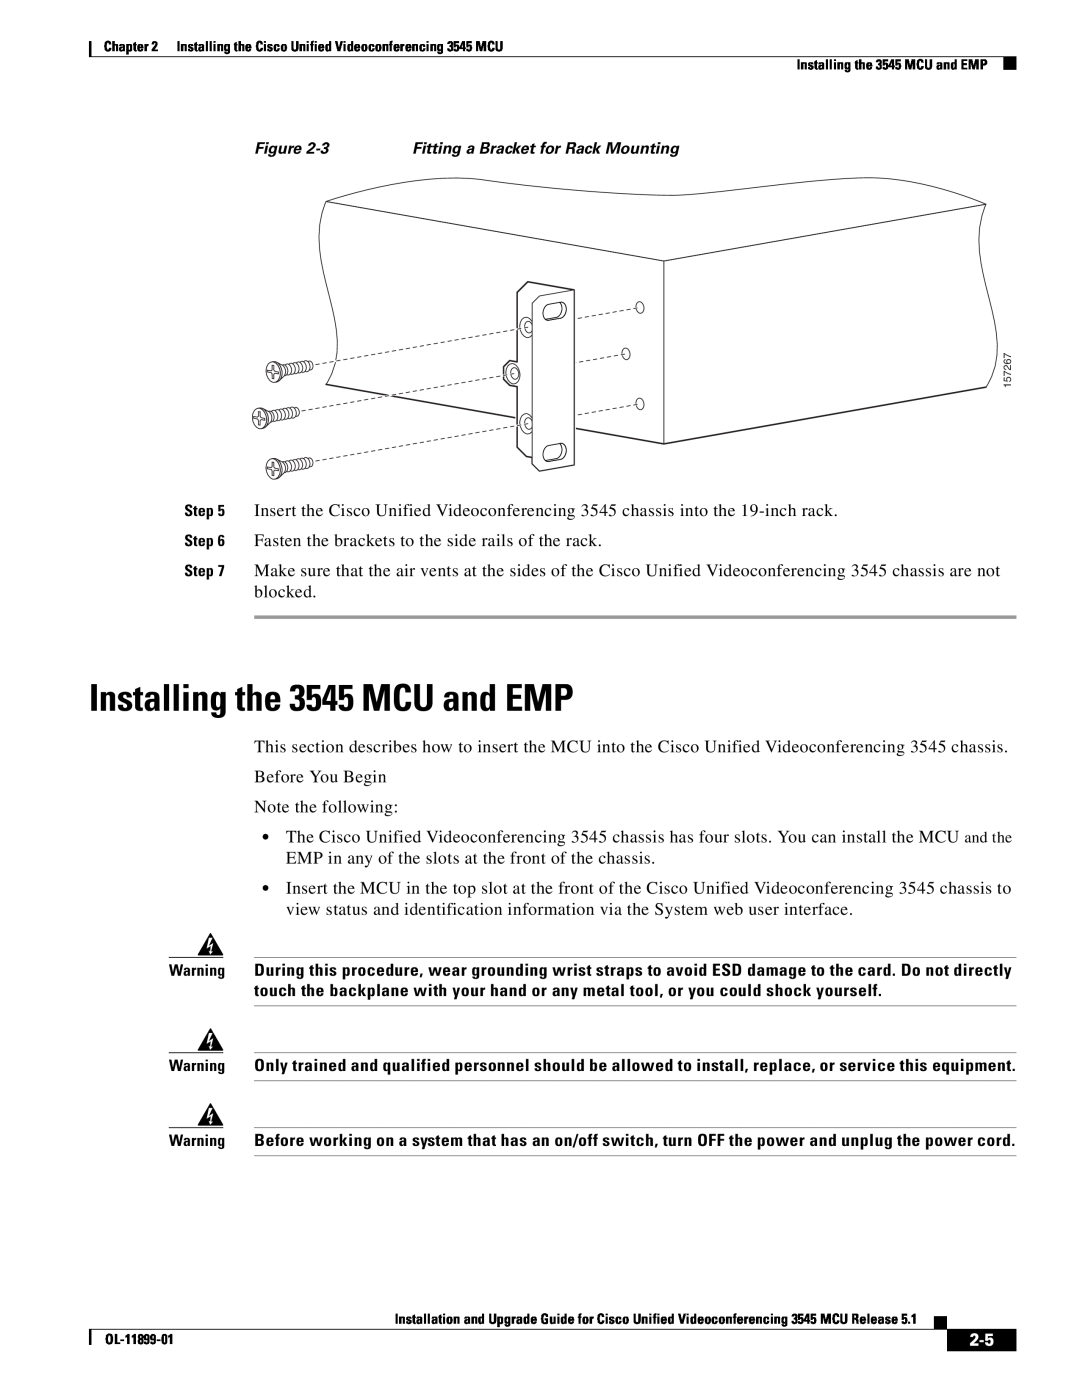 Cisco Systems manual Installing the 3545 MCU and EMP 